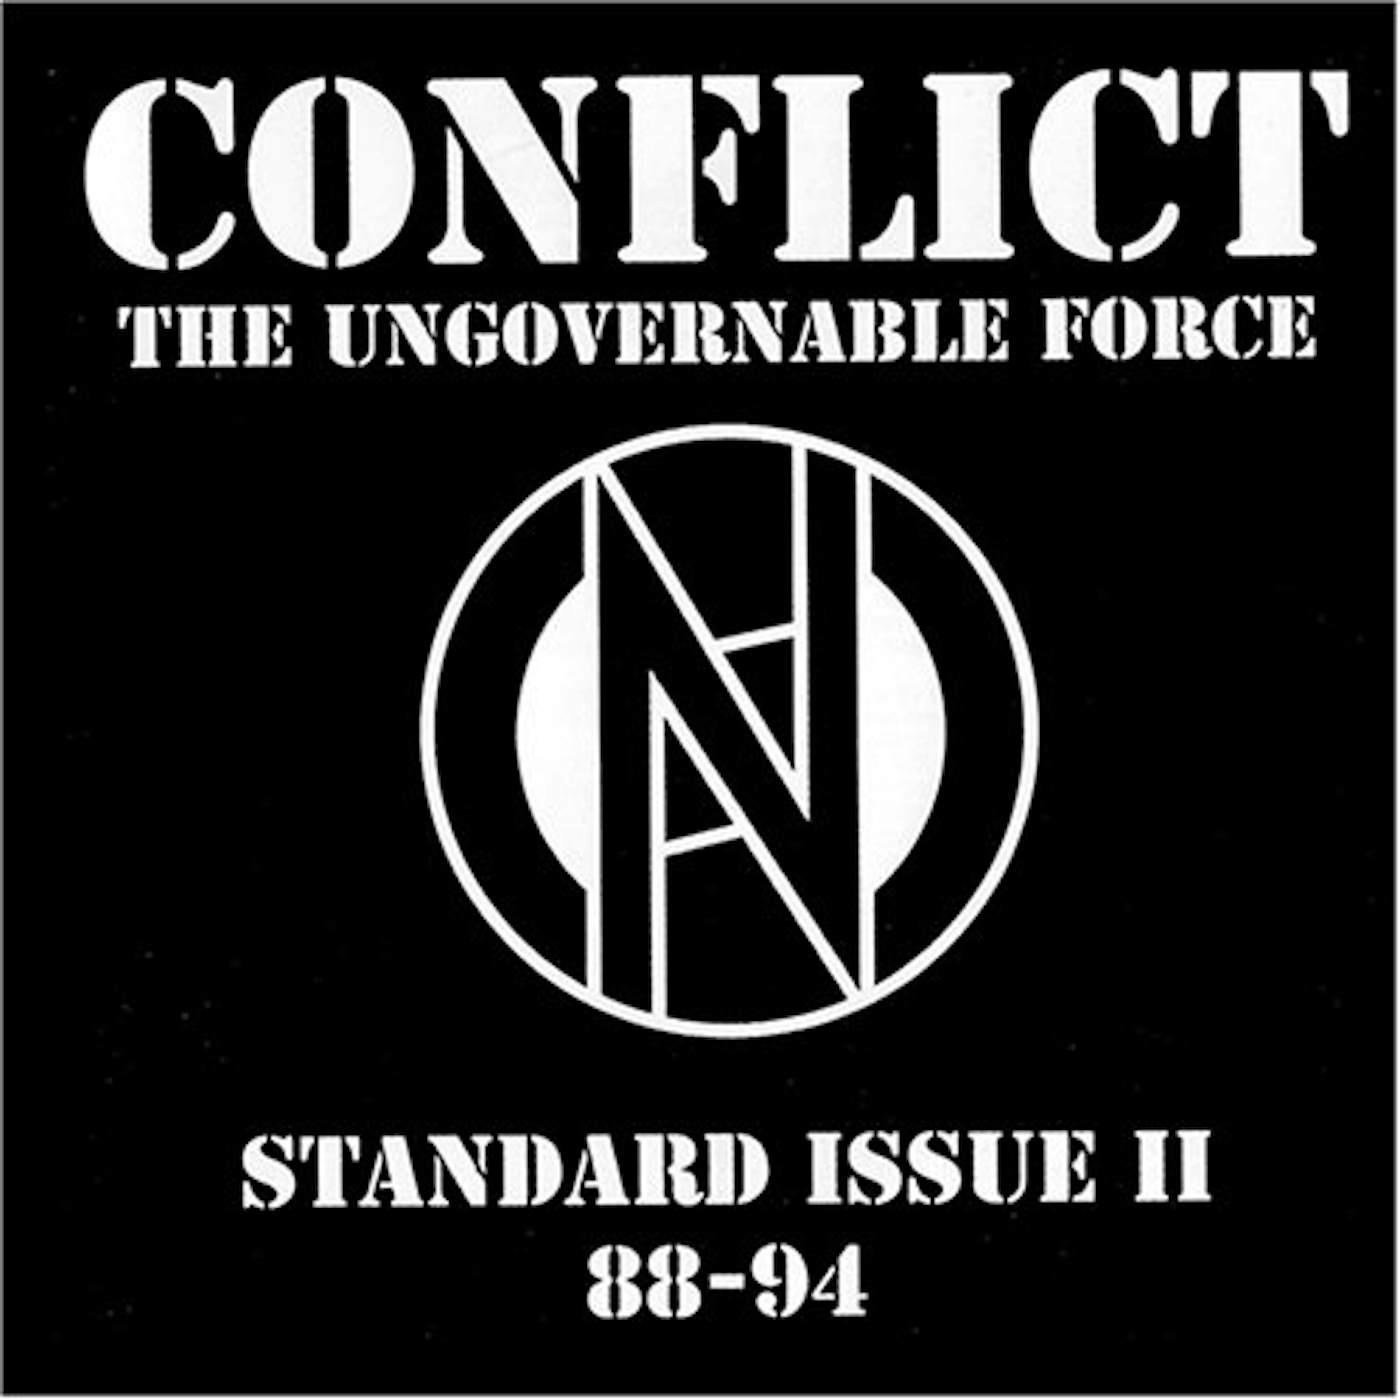 Conflict STANDARD ISSUE II 88-94 CD